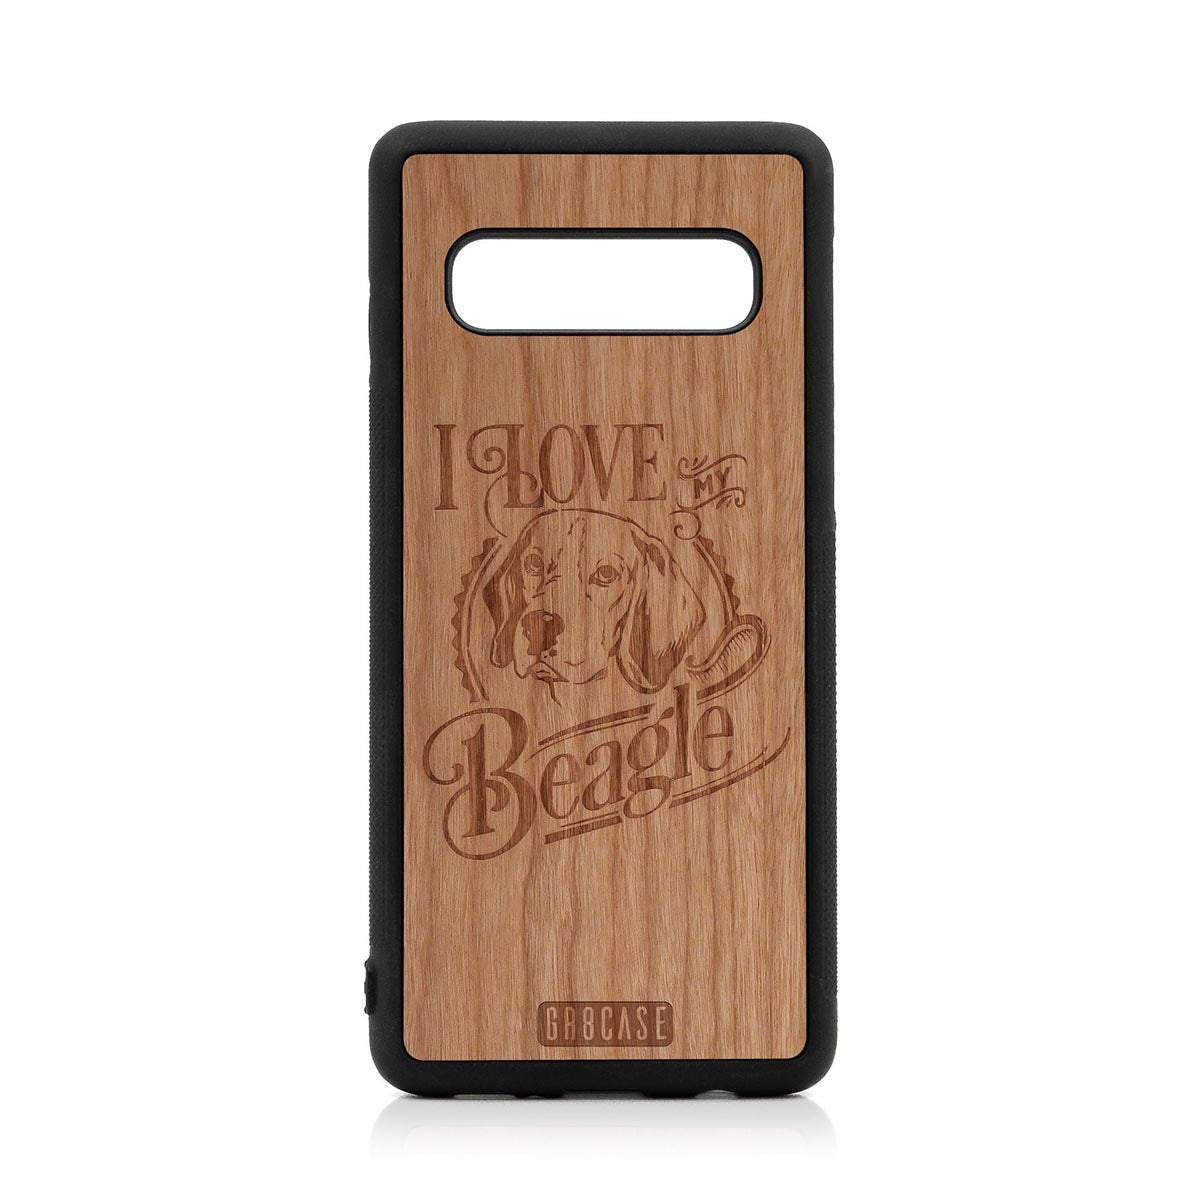 I Love My Beagle Design Wood Case For Samsung Galaxy S10 by GR8CASE